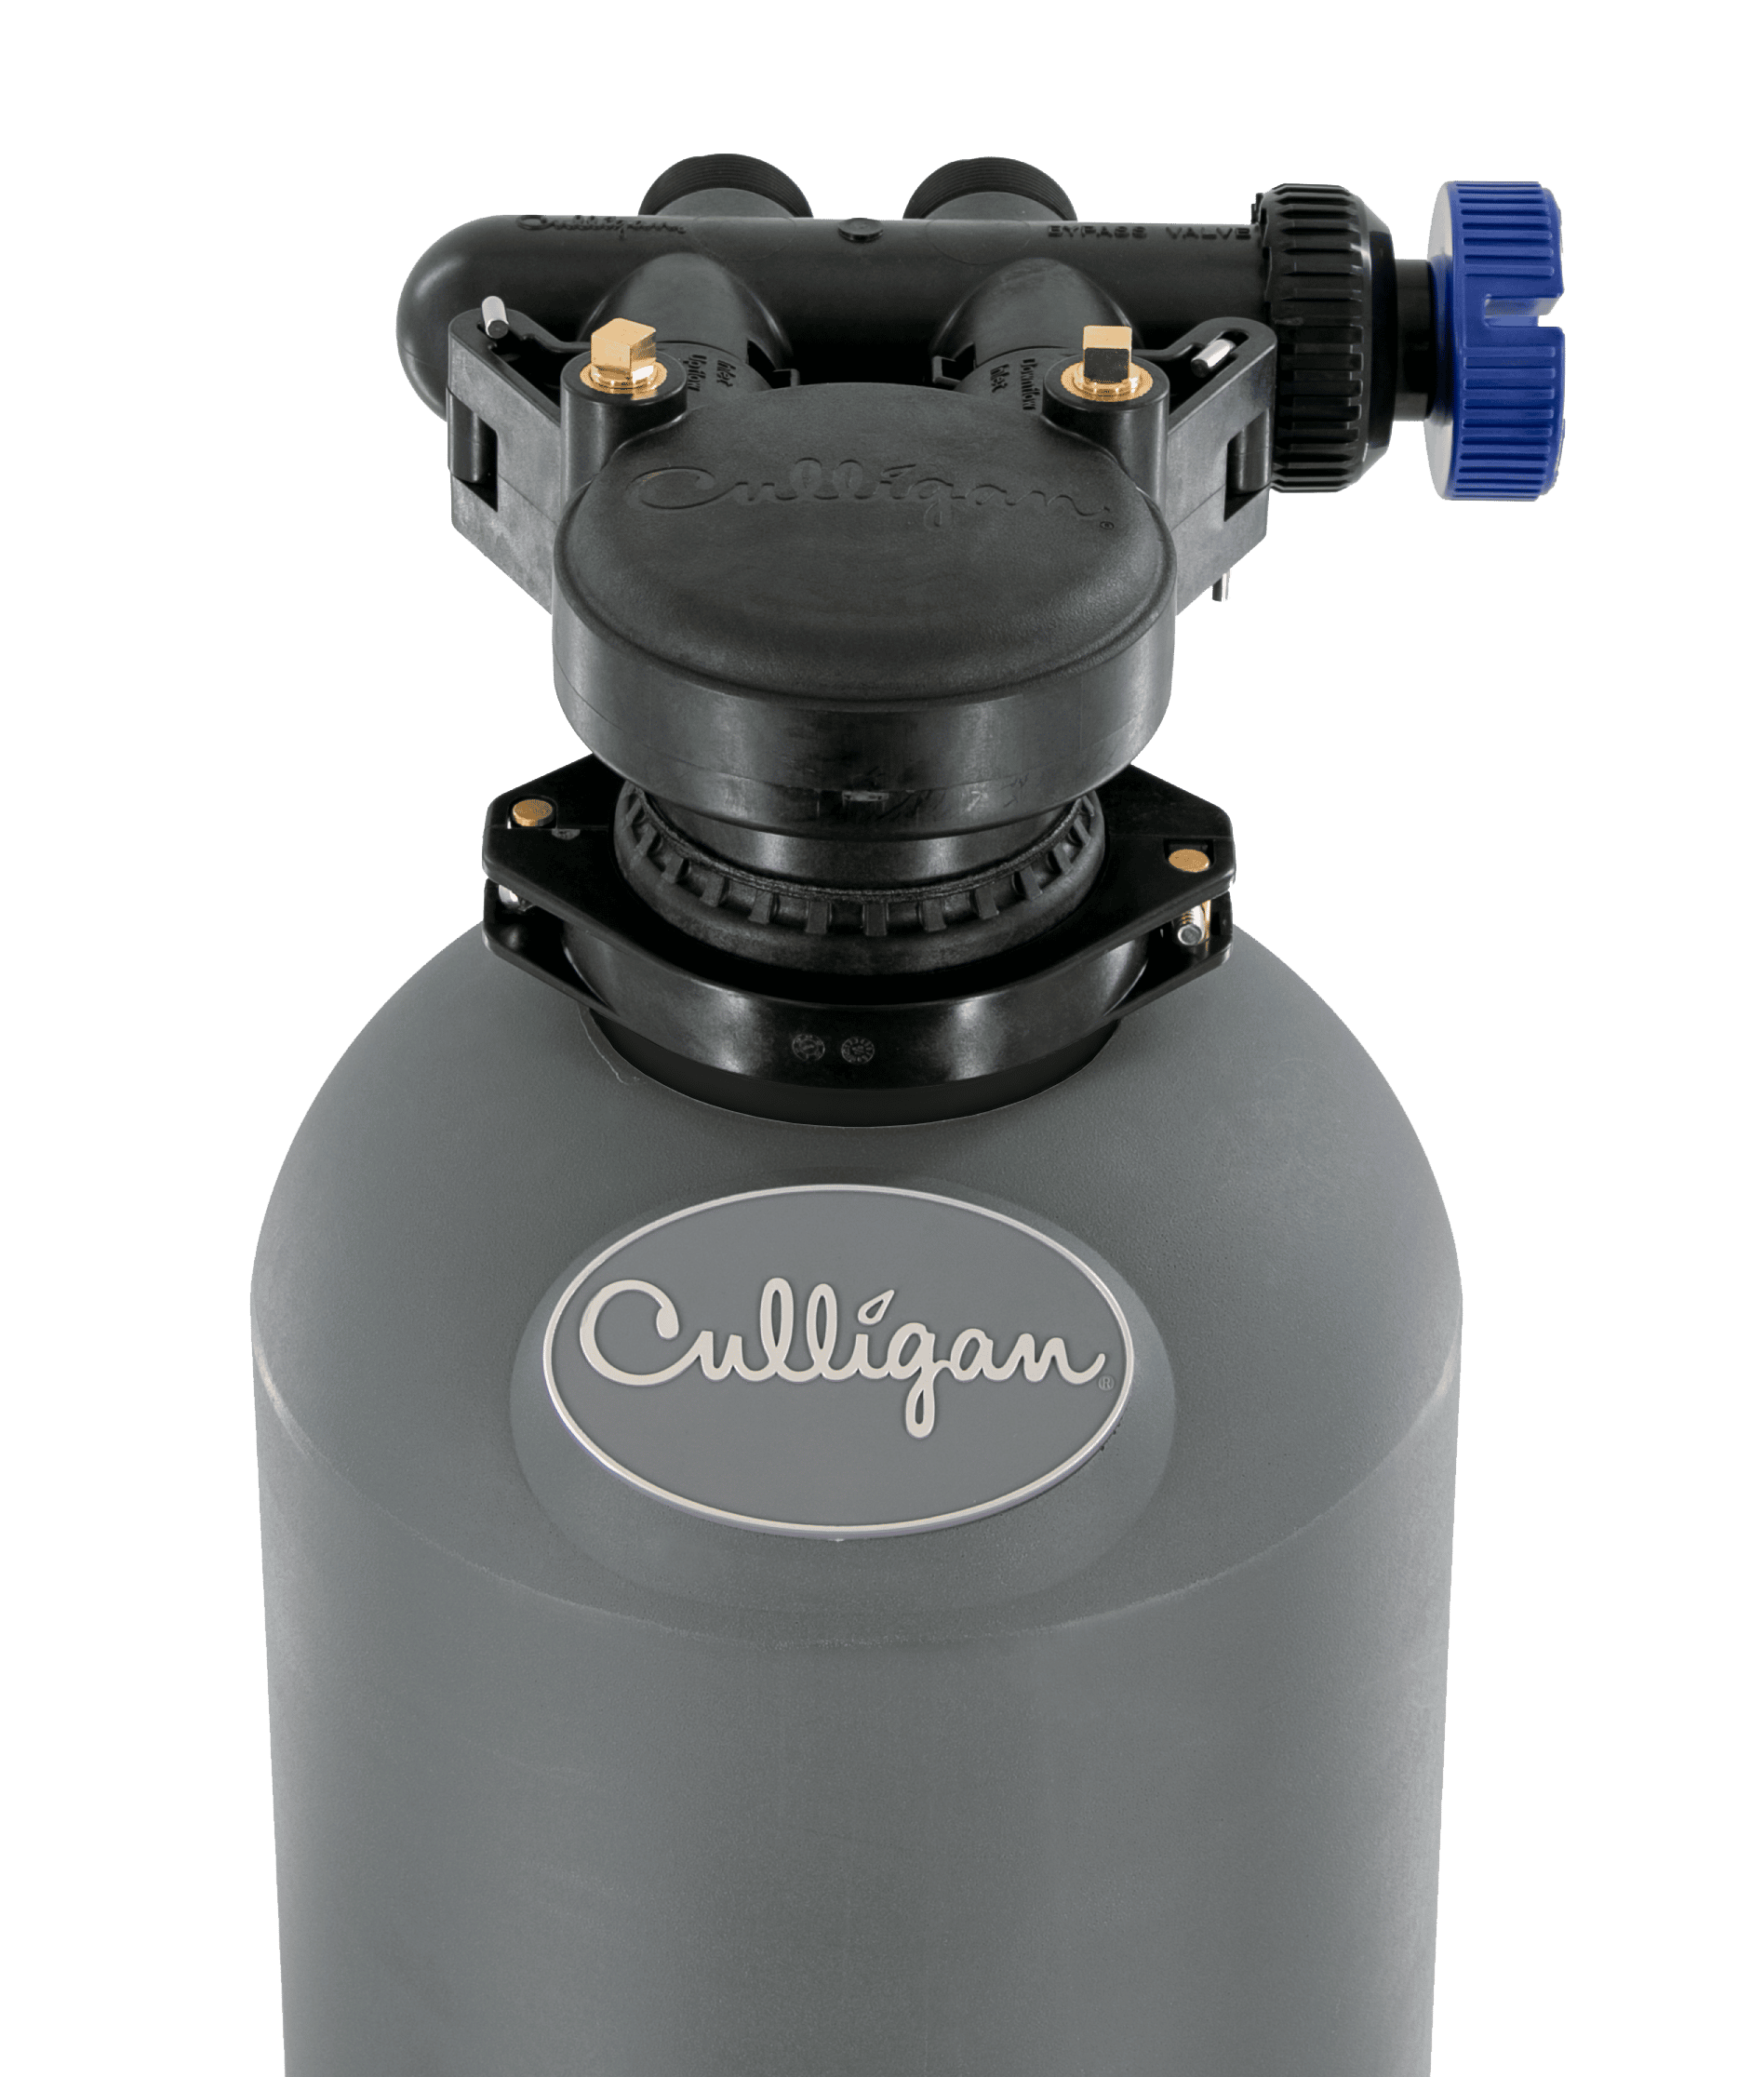 Salt-free water conditioners from Culligan KC